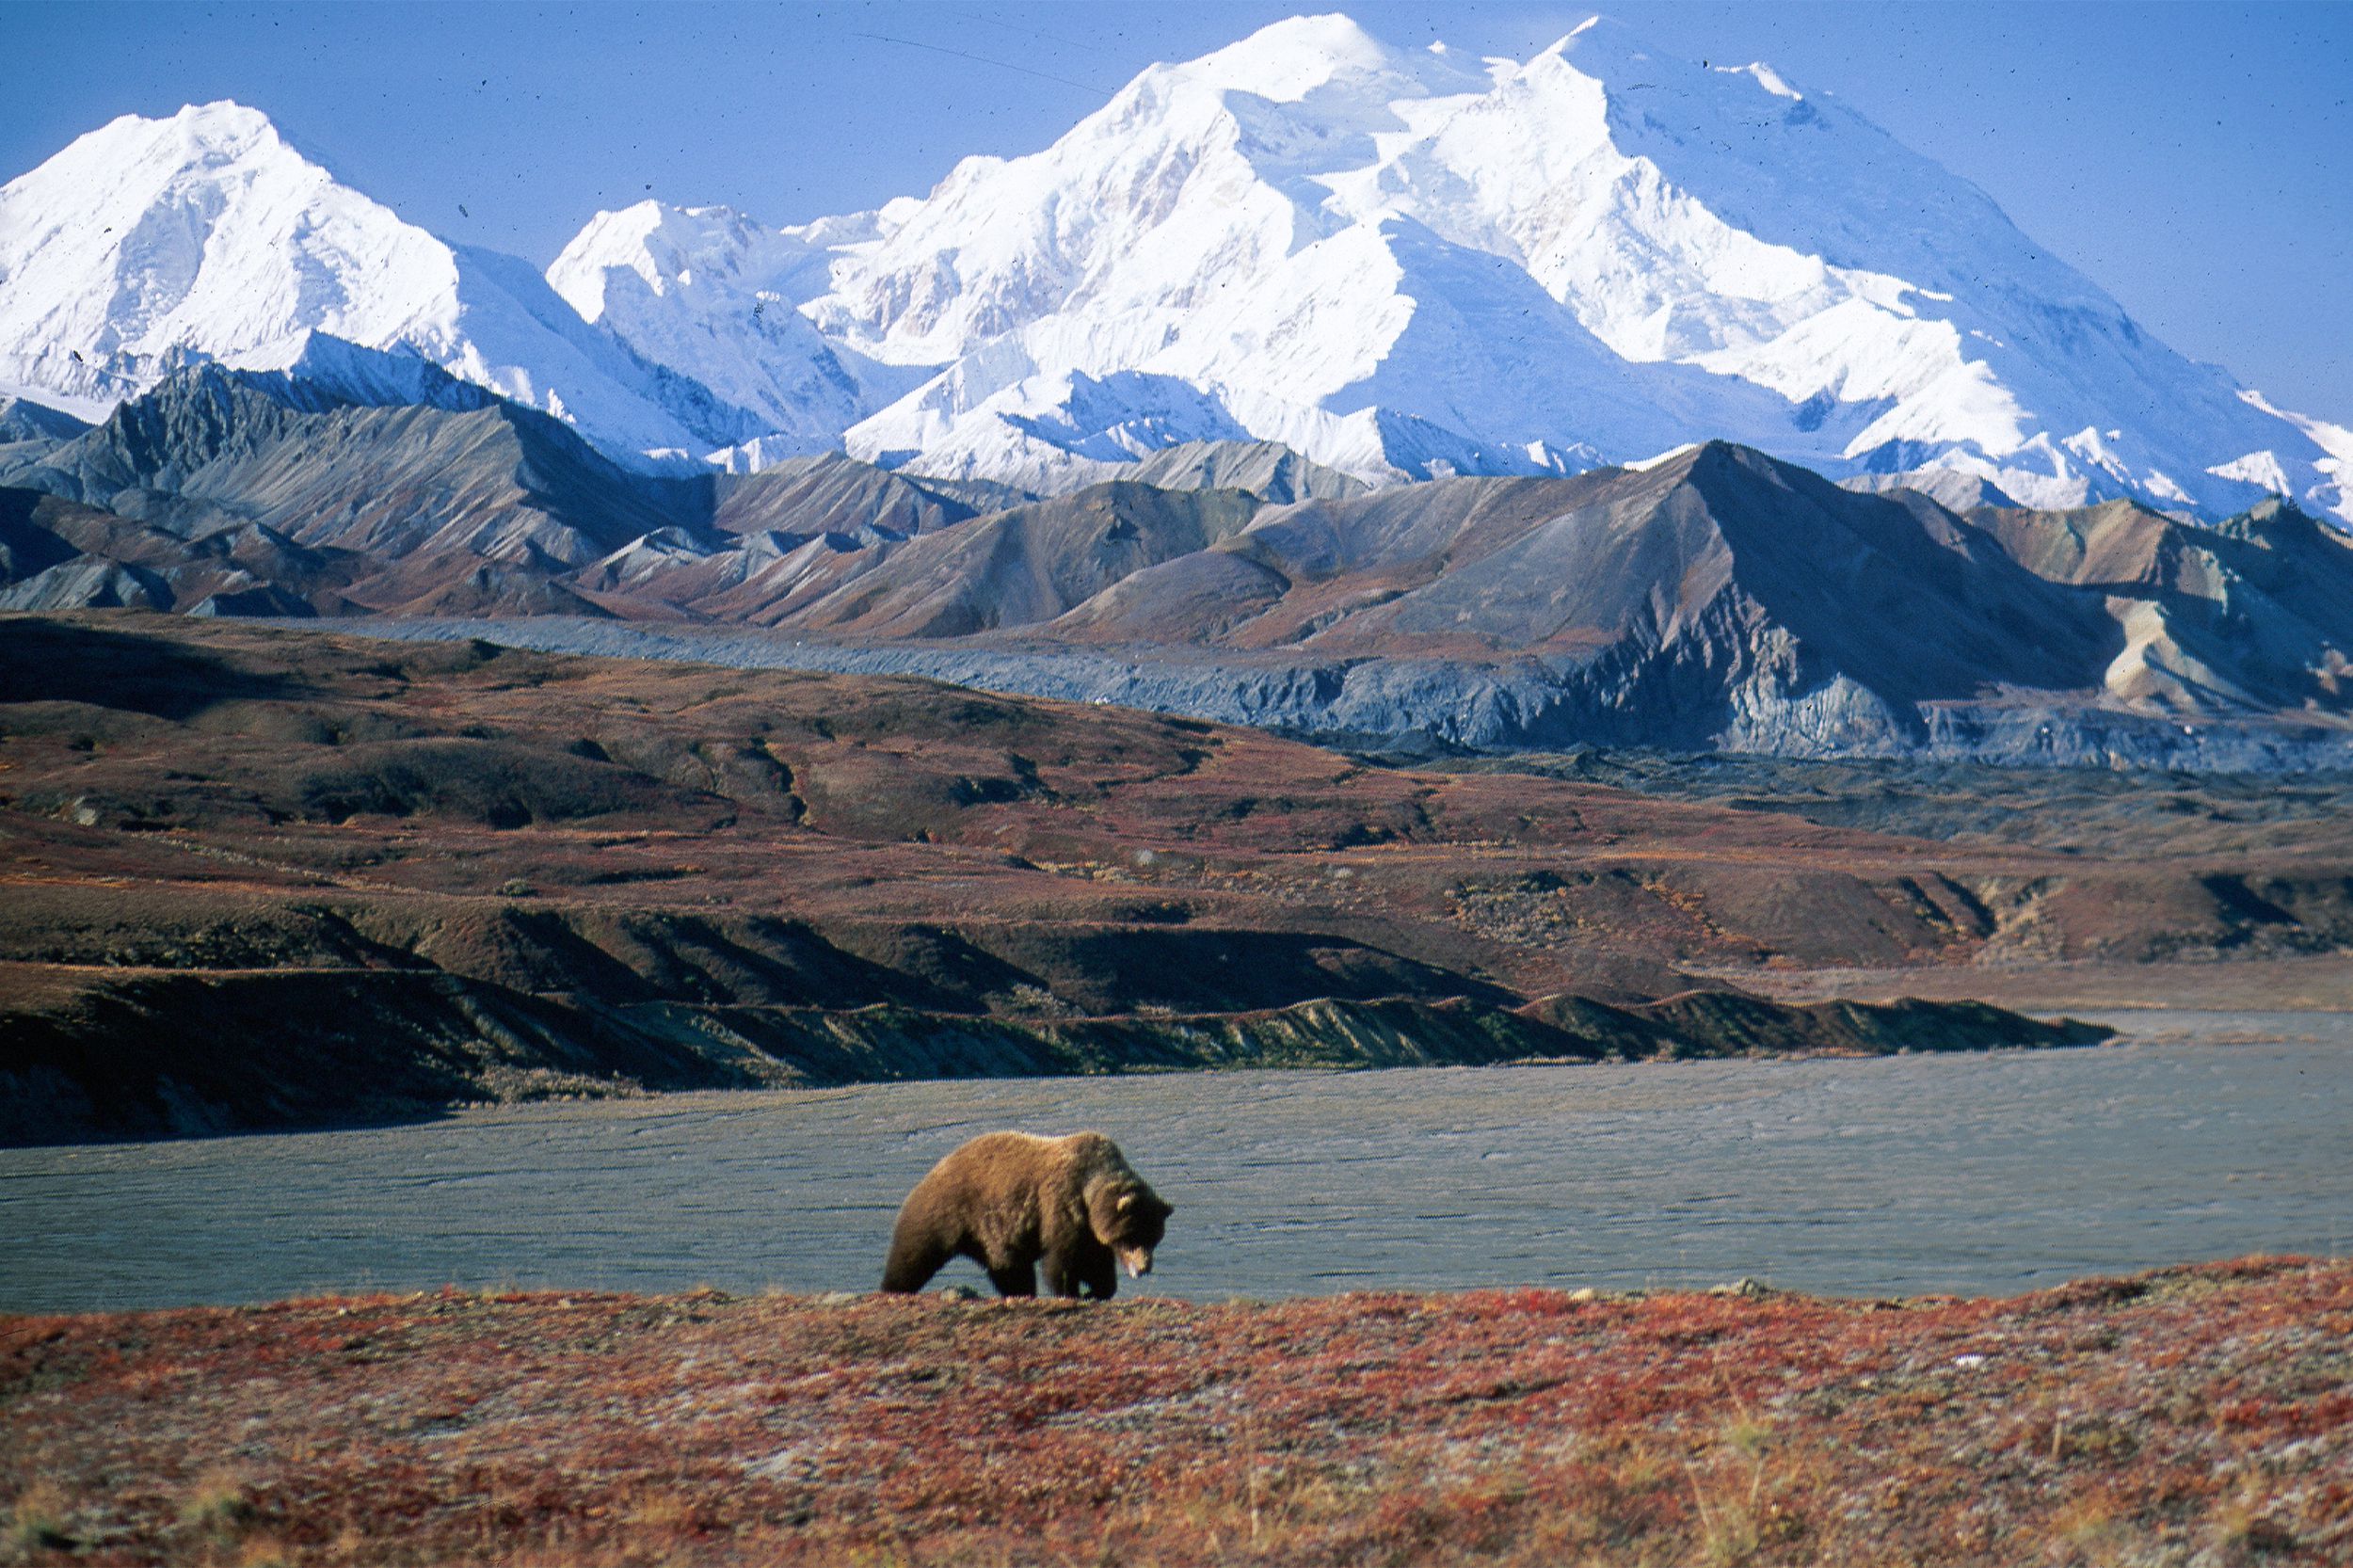 <p>Spread over 6 million acres, <a href="https://www.nps.gov/dena/index.htm">Denali's</a> natural beauty includes taiga forest, high alpine tundra, and snowy mountains. It's also home to the continent's tallest peak. Visitors are awed by the many wild animals that live freely here. </p>